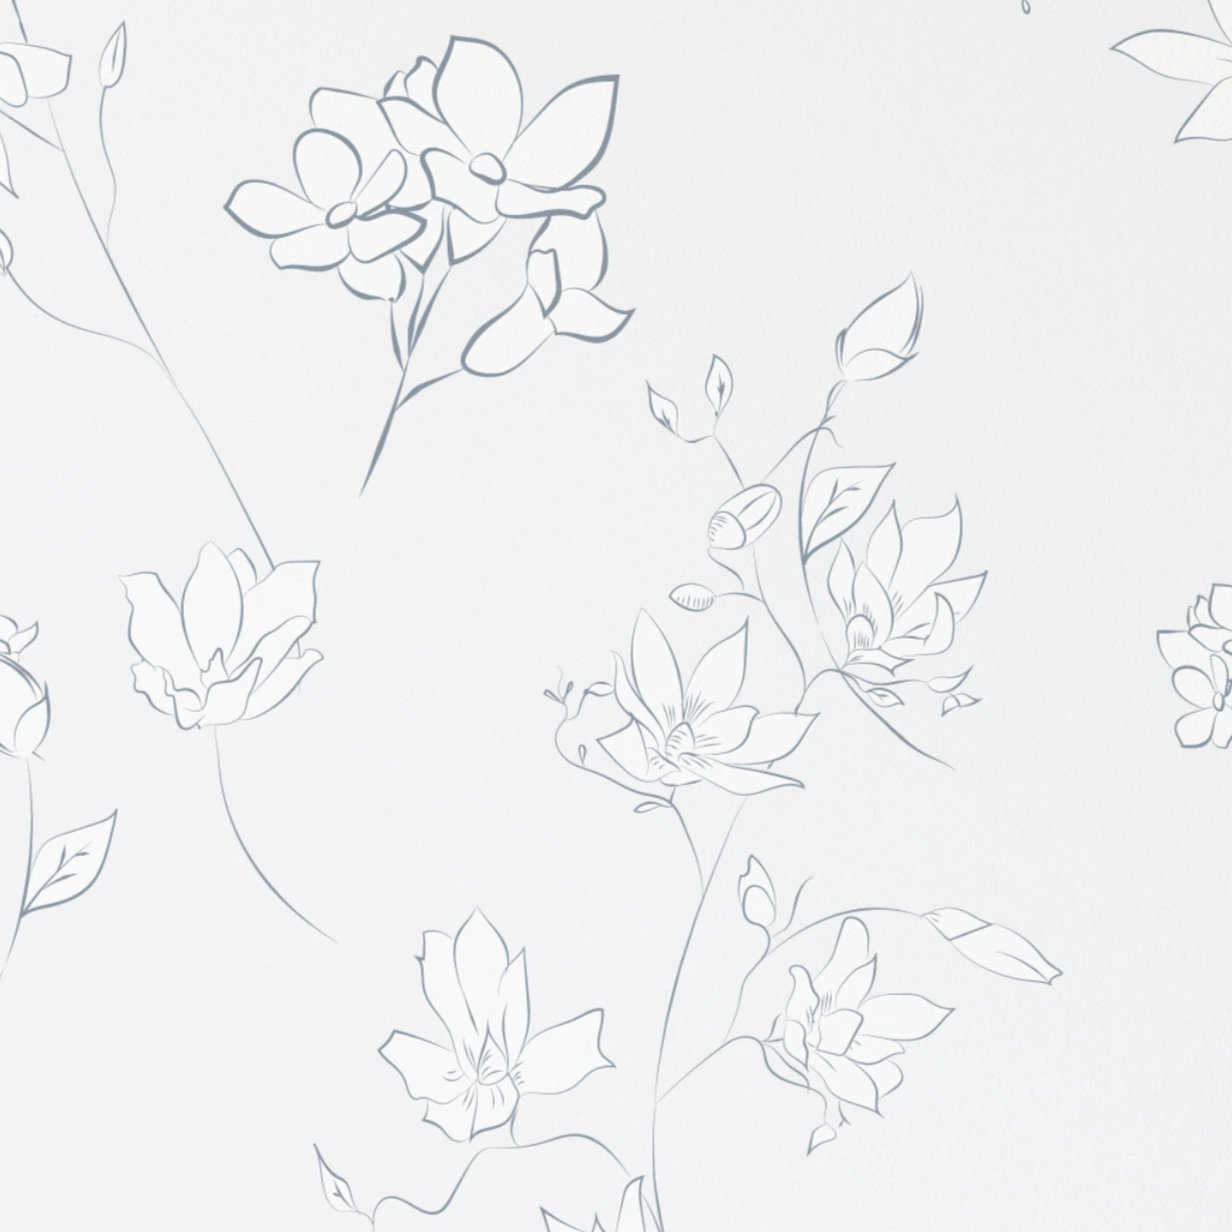 A close-up of the Minimal Floral Wallpaper IX, showcasing a delicate pattern of hand-drawn flowers and leaves in a subtle gray outline on a pristine white background, conveying a sense of simplicity and elegance.